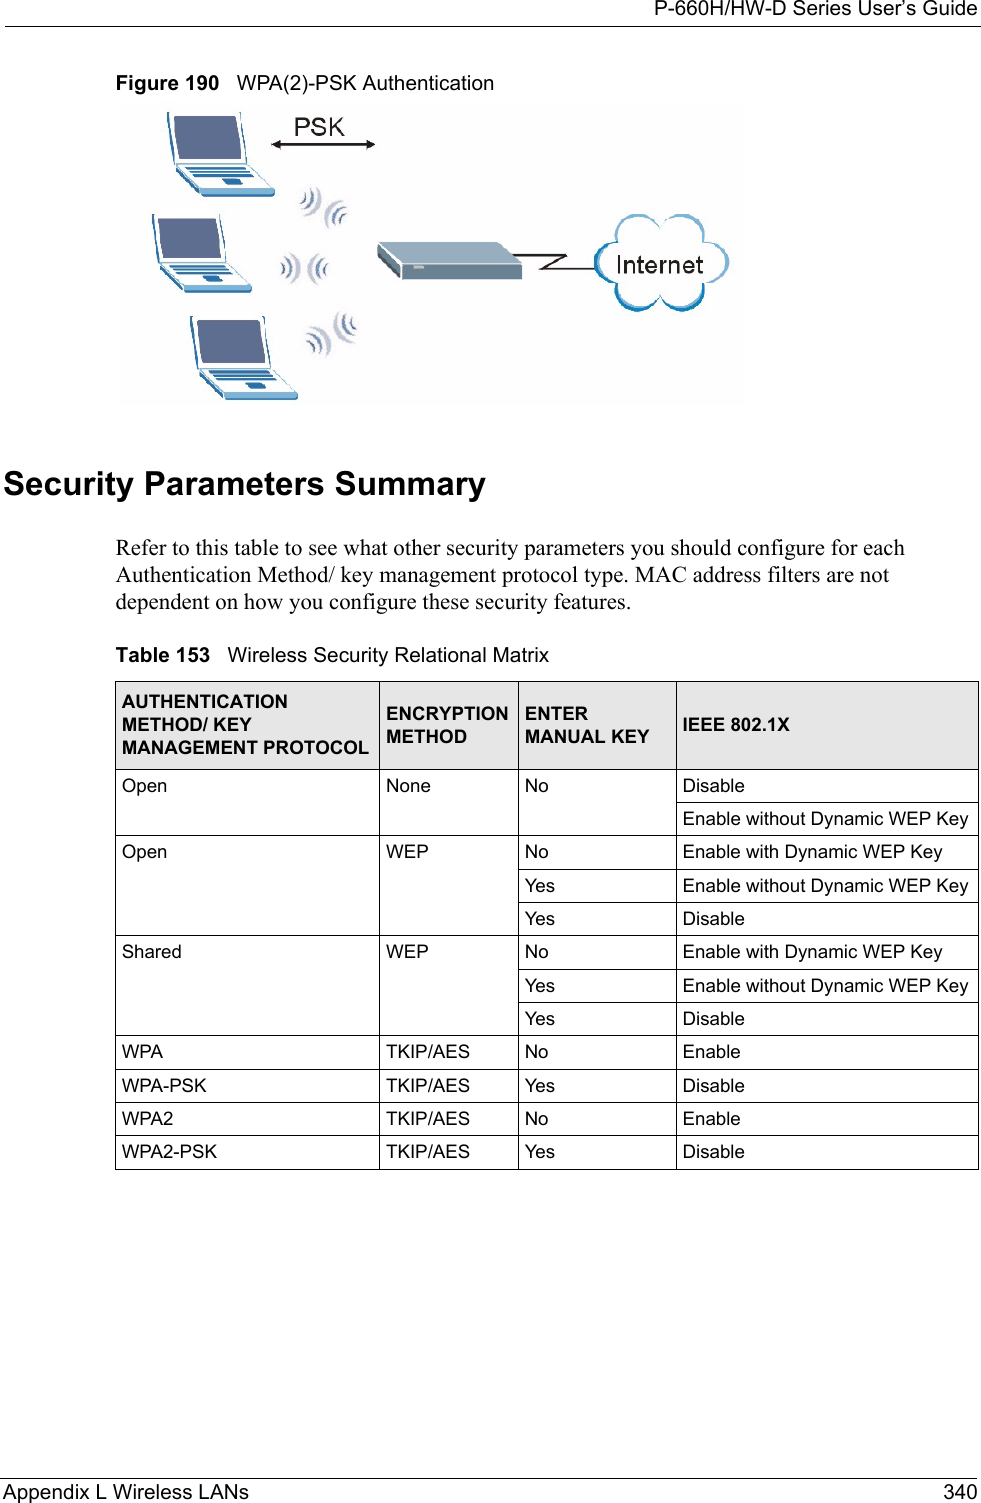 P-660H/HW-D Series User’s GuideAppendix L Wireless LANs 340Figure 190   WPA(2)-PSK AuthenticationSecurity Parameters SummaryRefer to this table to see what other security parameters you should configure for each Authentication Method/ key management protocol type. MAC address filters are not dependent on how you configure these security features.Table 153   Wireless Security Relational MatrixAUTHENTICATION METHOD/ KEY MANAGEMENT PROTOCOLENCRYPTION METHODENTER MANUAL KEY IEEE 802.1XOpen None No DisableEnable without Dynamic WEP KeyOpen WEP No           Enable with Dynamic WEP KeyYes Enable without Dynamic WEP KeyYes DisableShared WEP  No           Enable with Dynamic WEP KeyYes Enable without Dynamic WEP KeyYes DisableWPA  TKIP/AES No EnableWPA-PSK  TKIP/AES Yes DisableWPA2 TKIP/AES No EnableWPA2-PSK  TKIP/AES Yes Disable